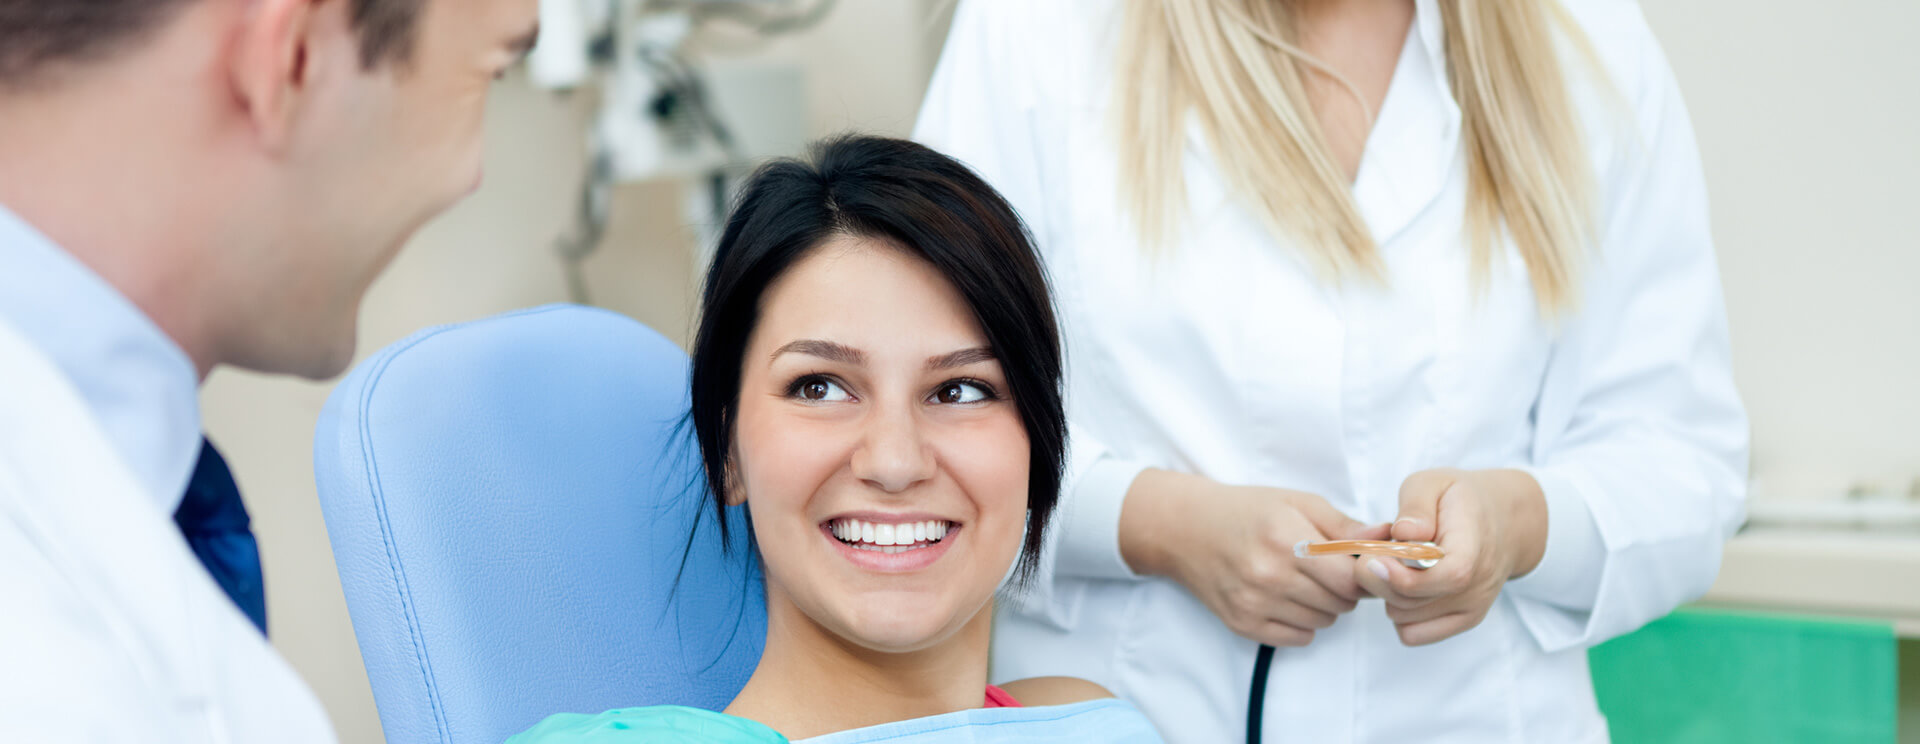 Female patient smiling while talking with dentist and assistant standing beghind